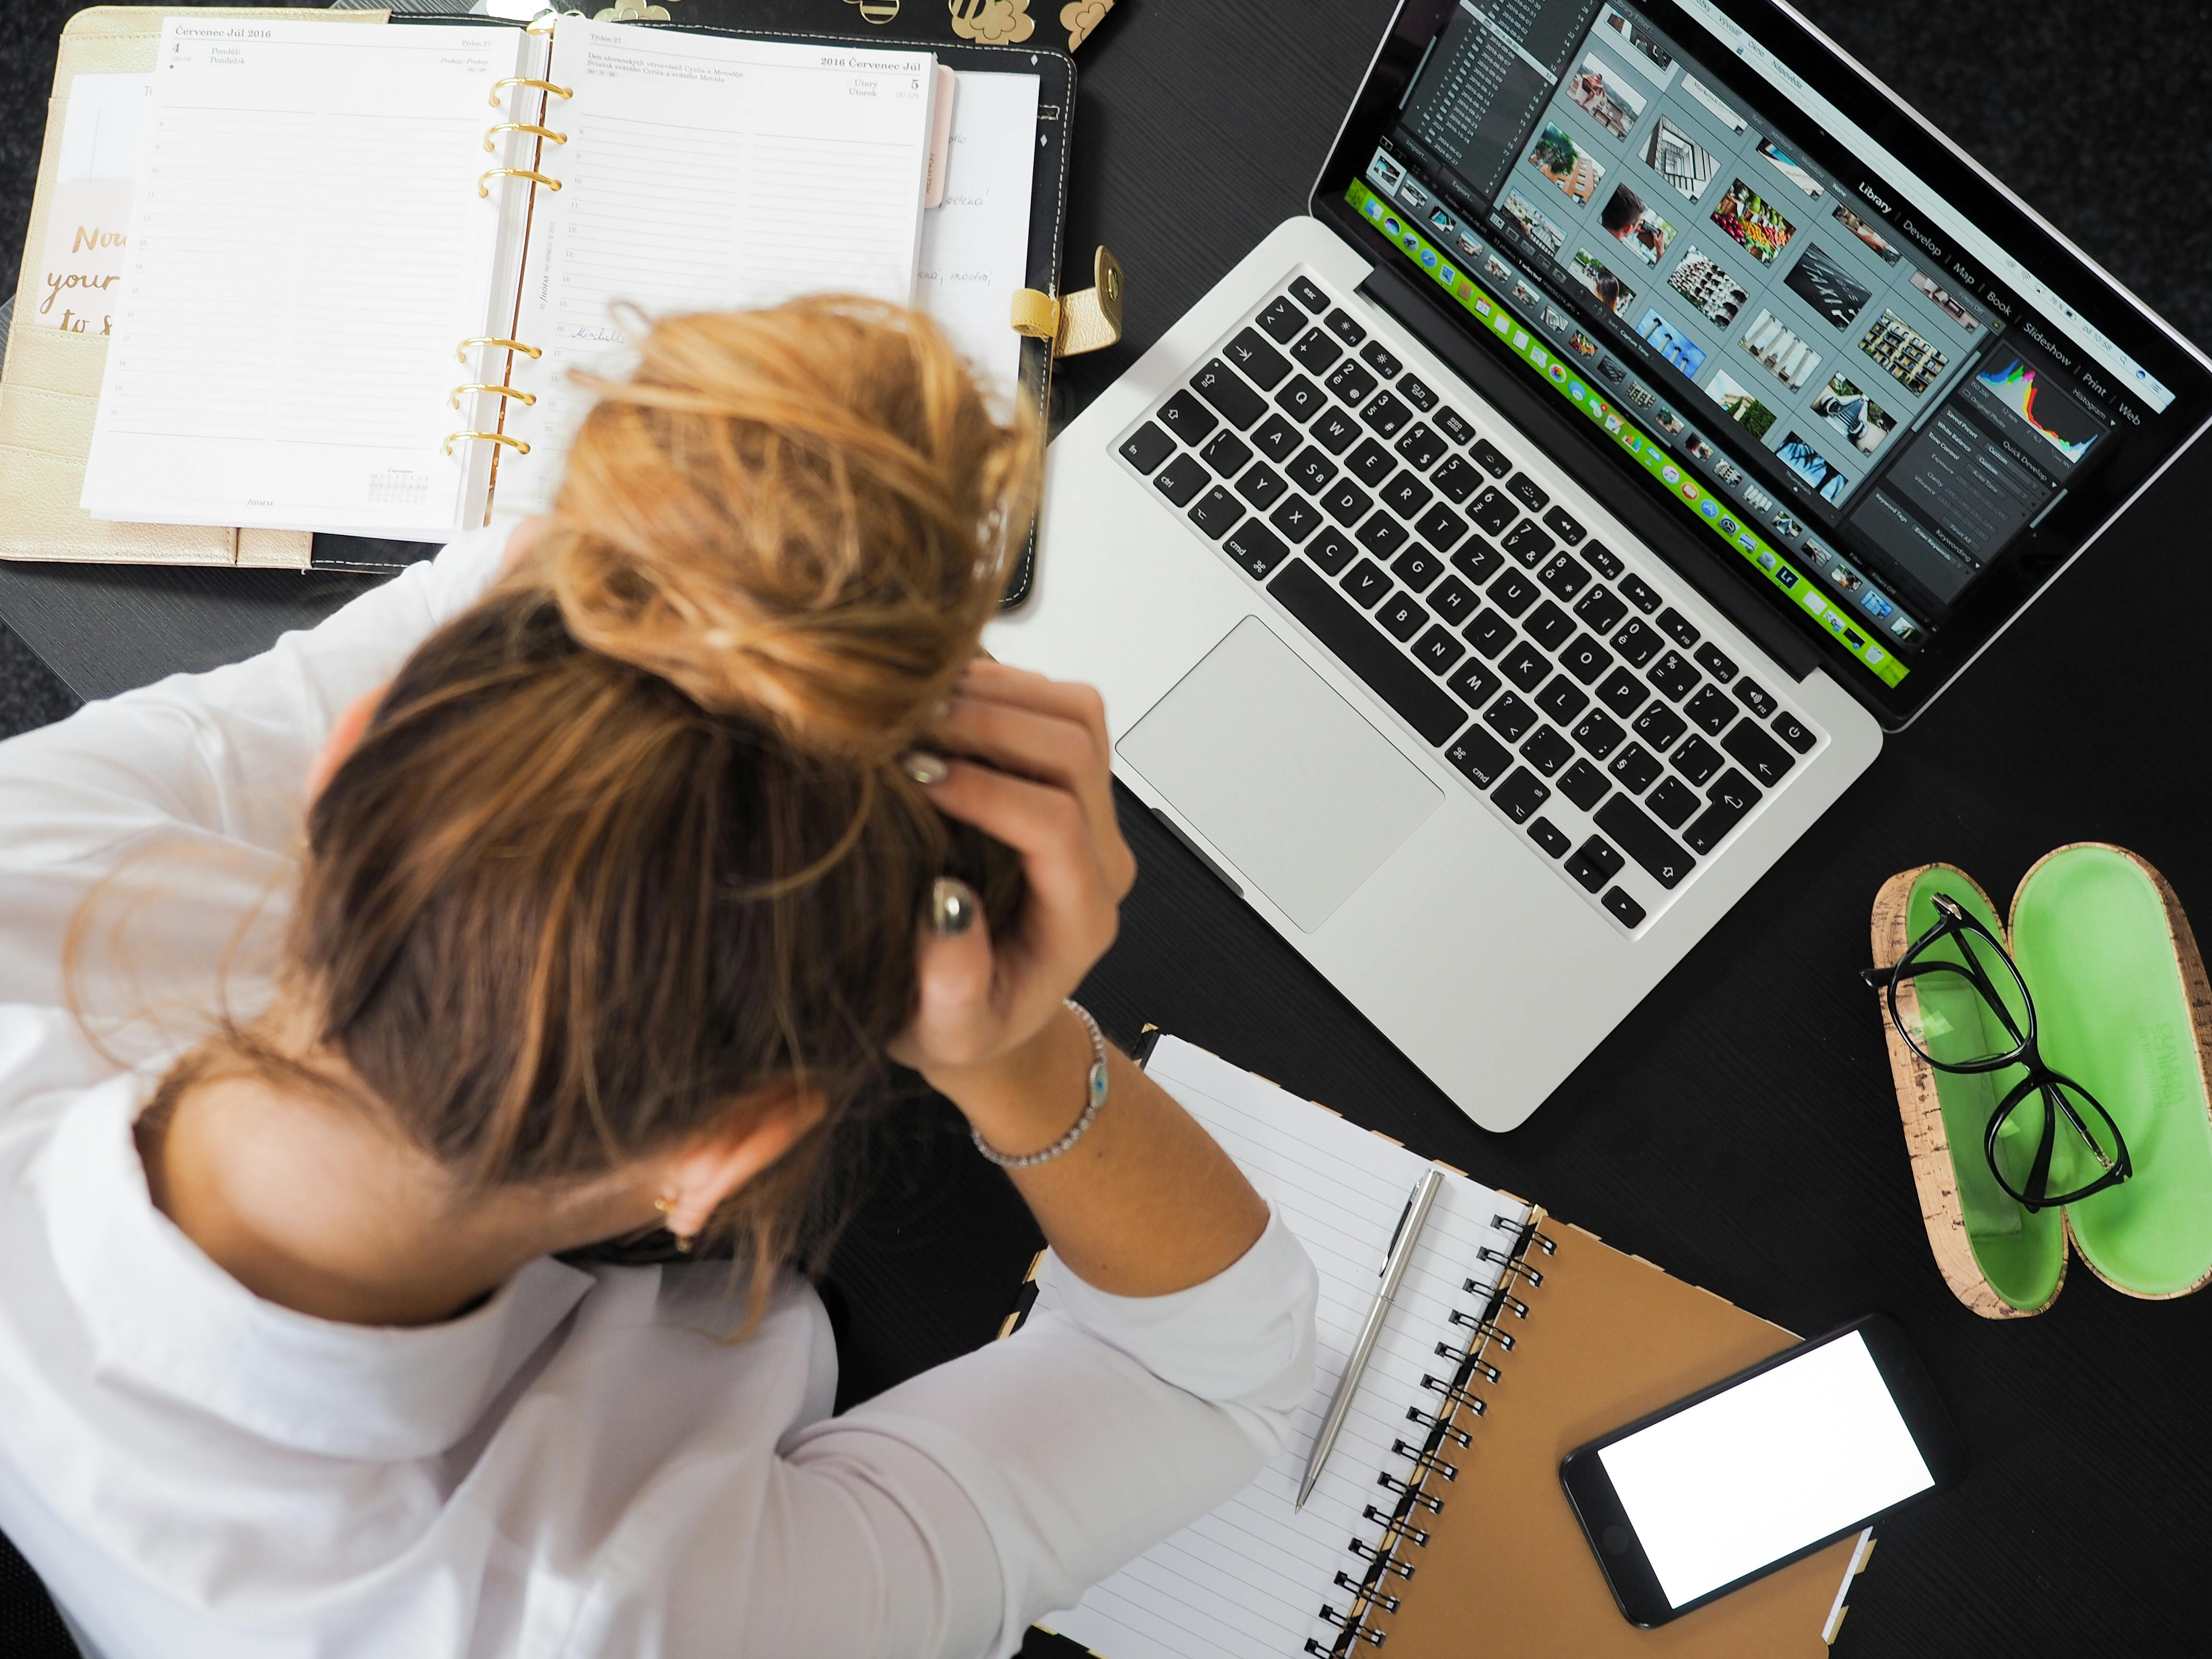 A woman stressed on her laptop | Source: Pexels